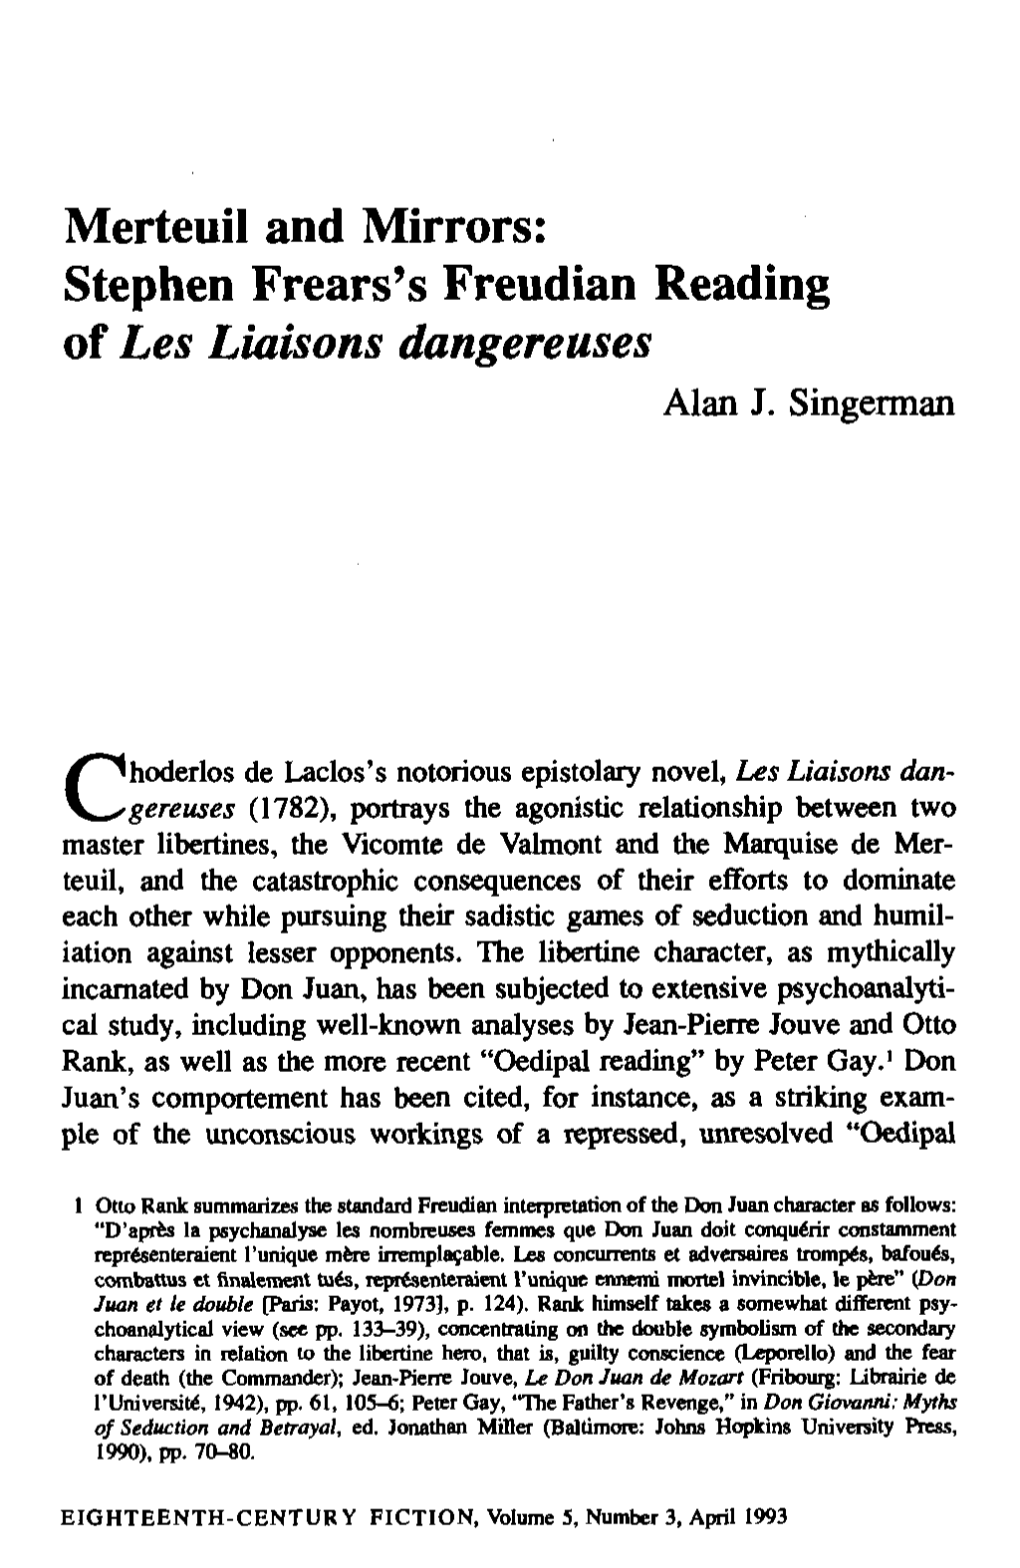 Merteuil and Mirrors: Stephen Frears's Freudian Reading of Les Liaisons Dangereuses Alan J